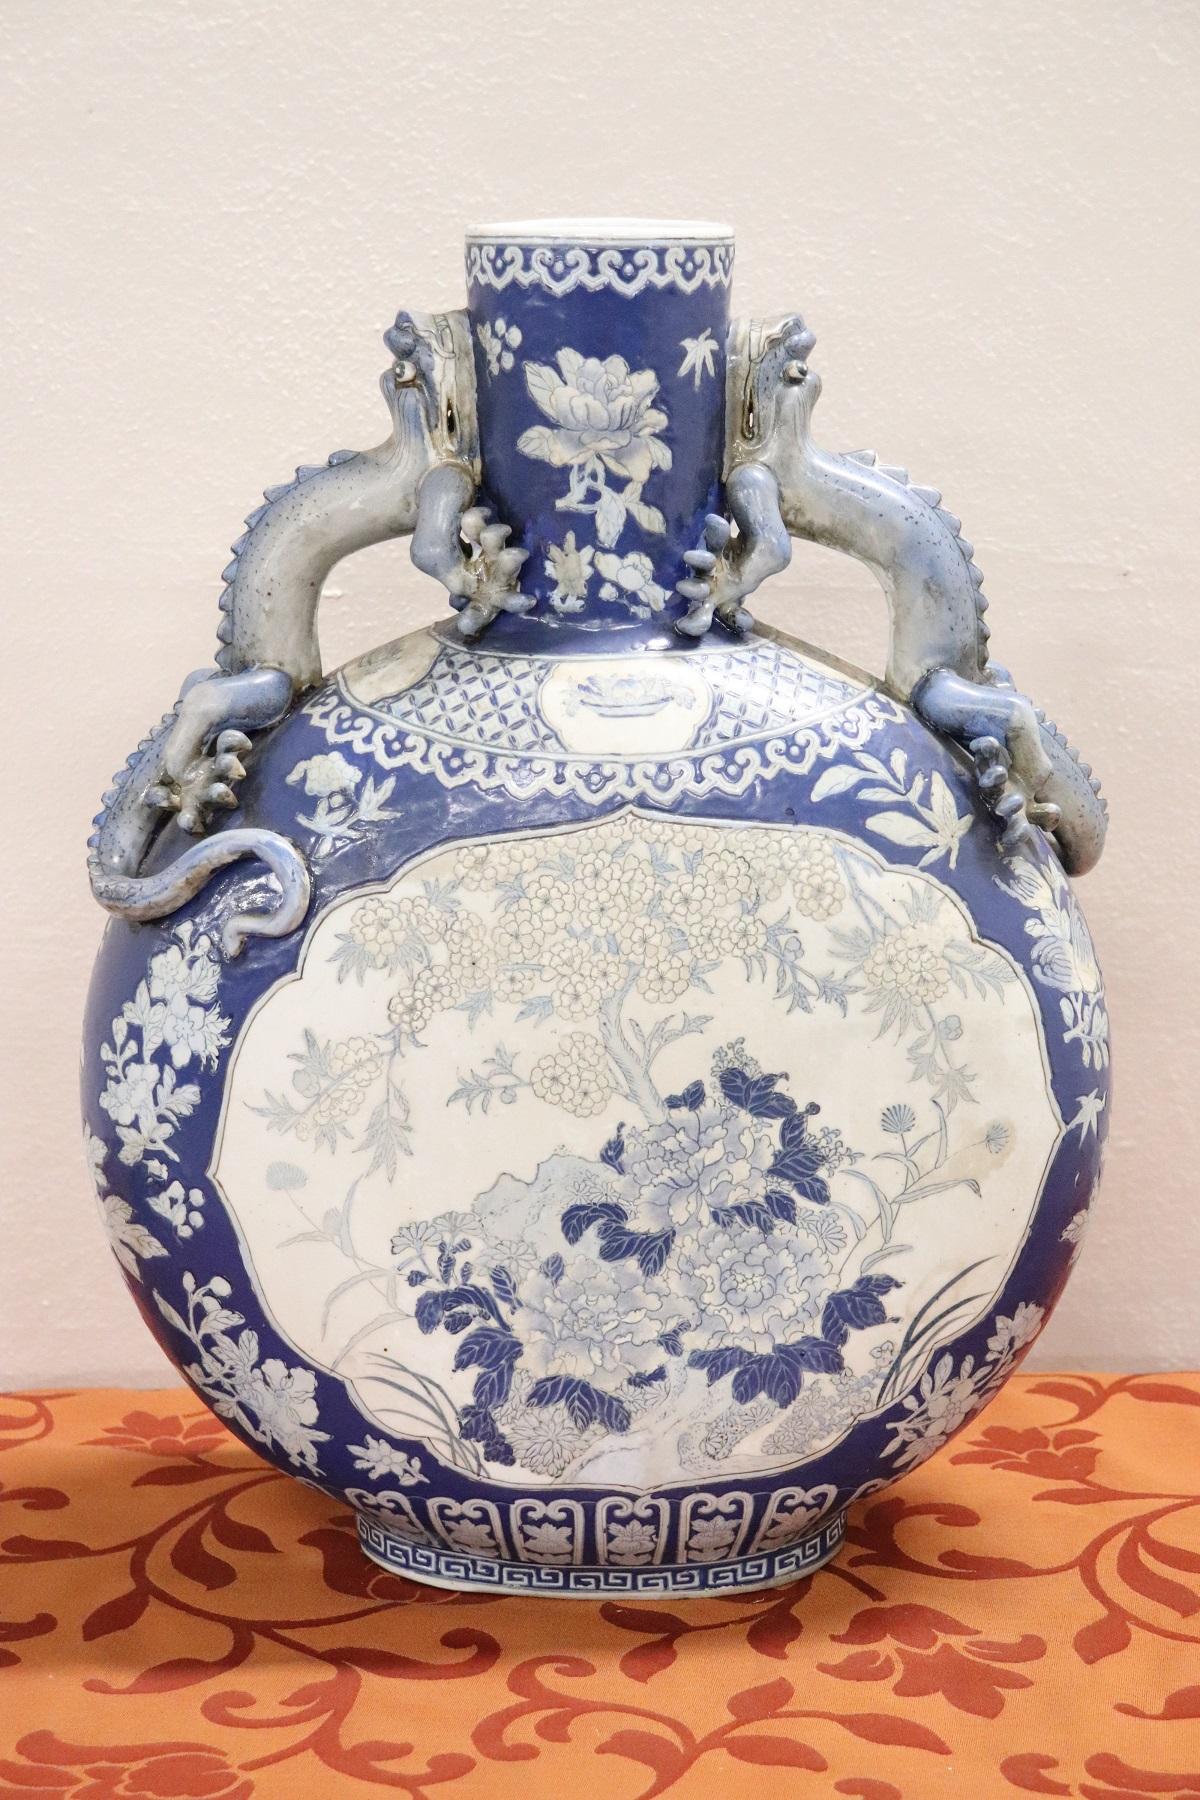 20th Century Chinese Hand Painted Vase in Ceramic blue and Floral Motifs (Frühes 20. Jahrhundert)